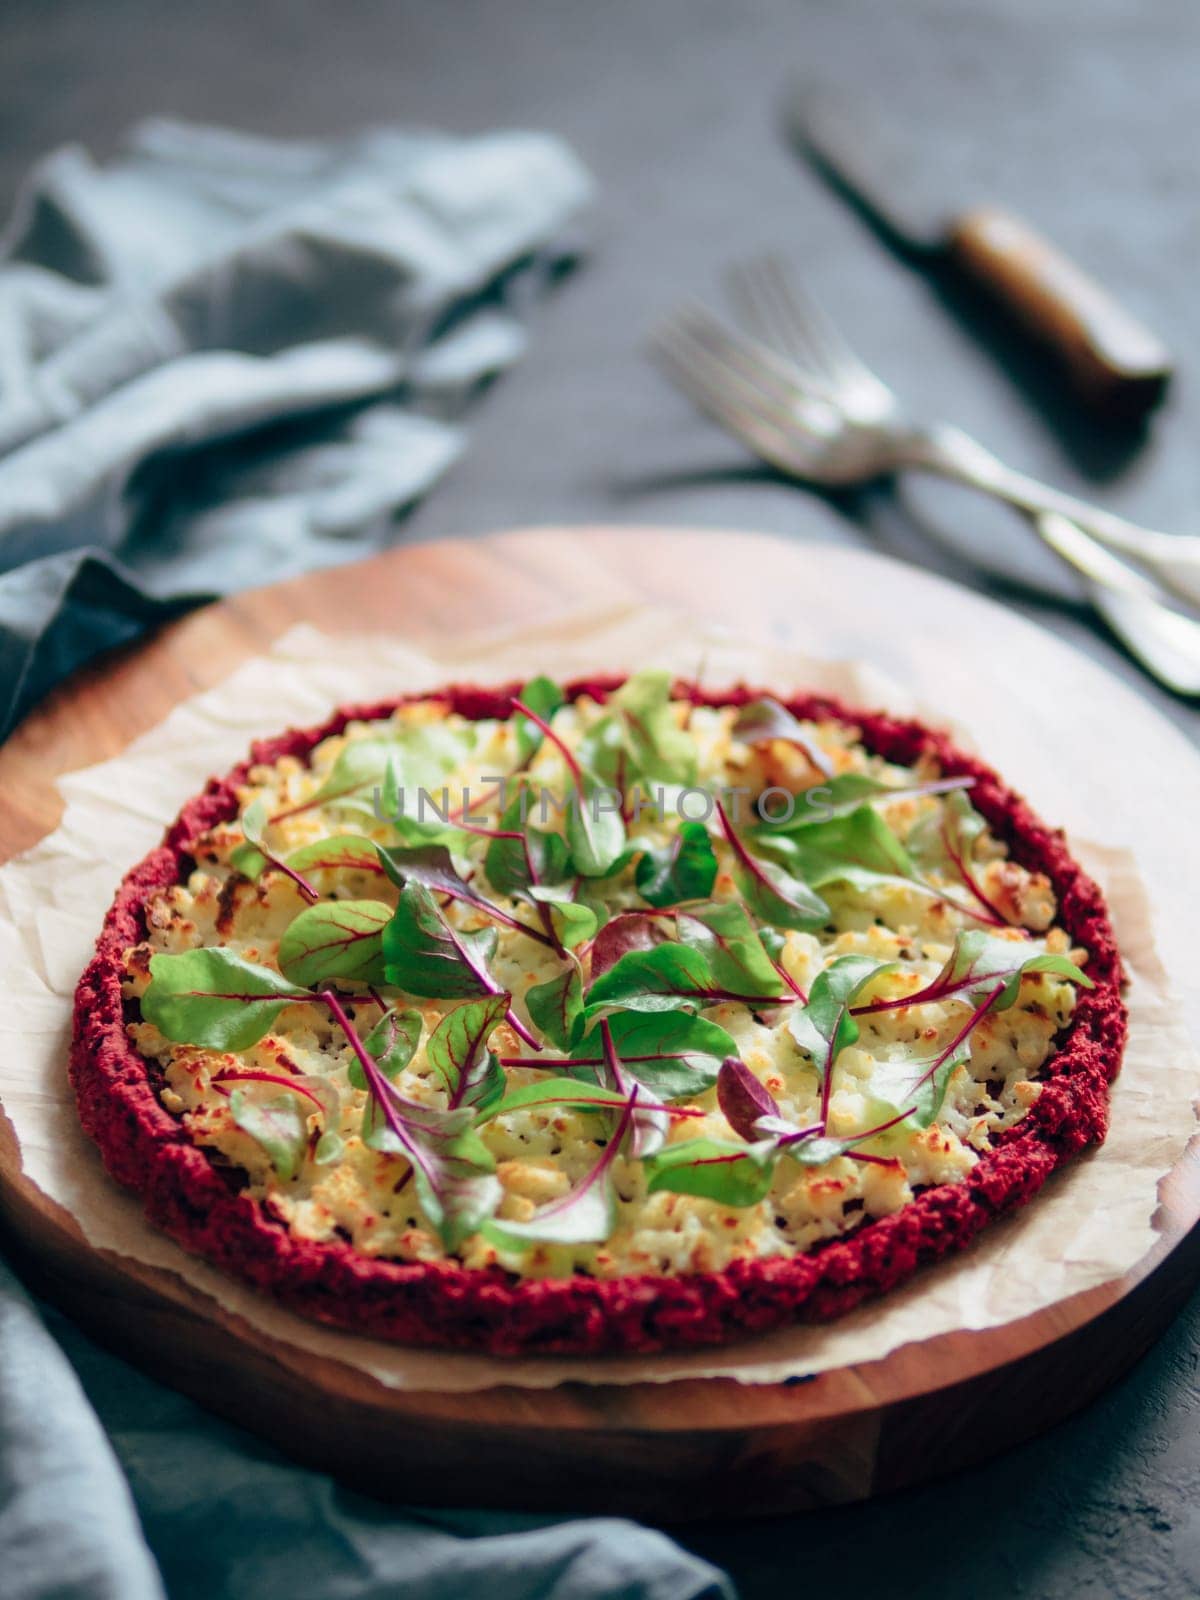 beetroot pizza crust with fresh swiss chard or mangold, beetroot leaves. Ideas and recipes for vegan snack.Egg-free pizza crust with chia seeds and wholegrain brown rice flour. Copy space. Shallow DOF